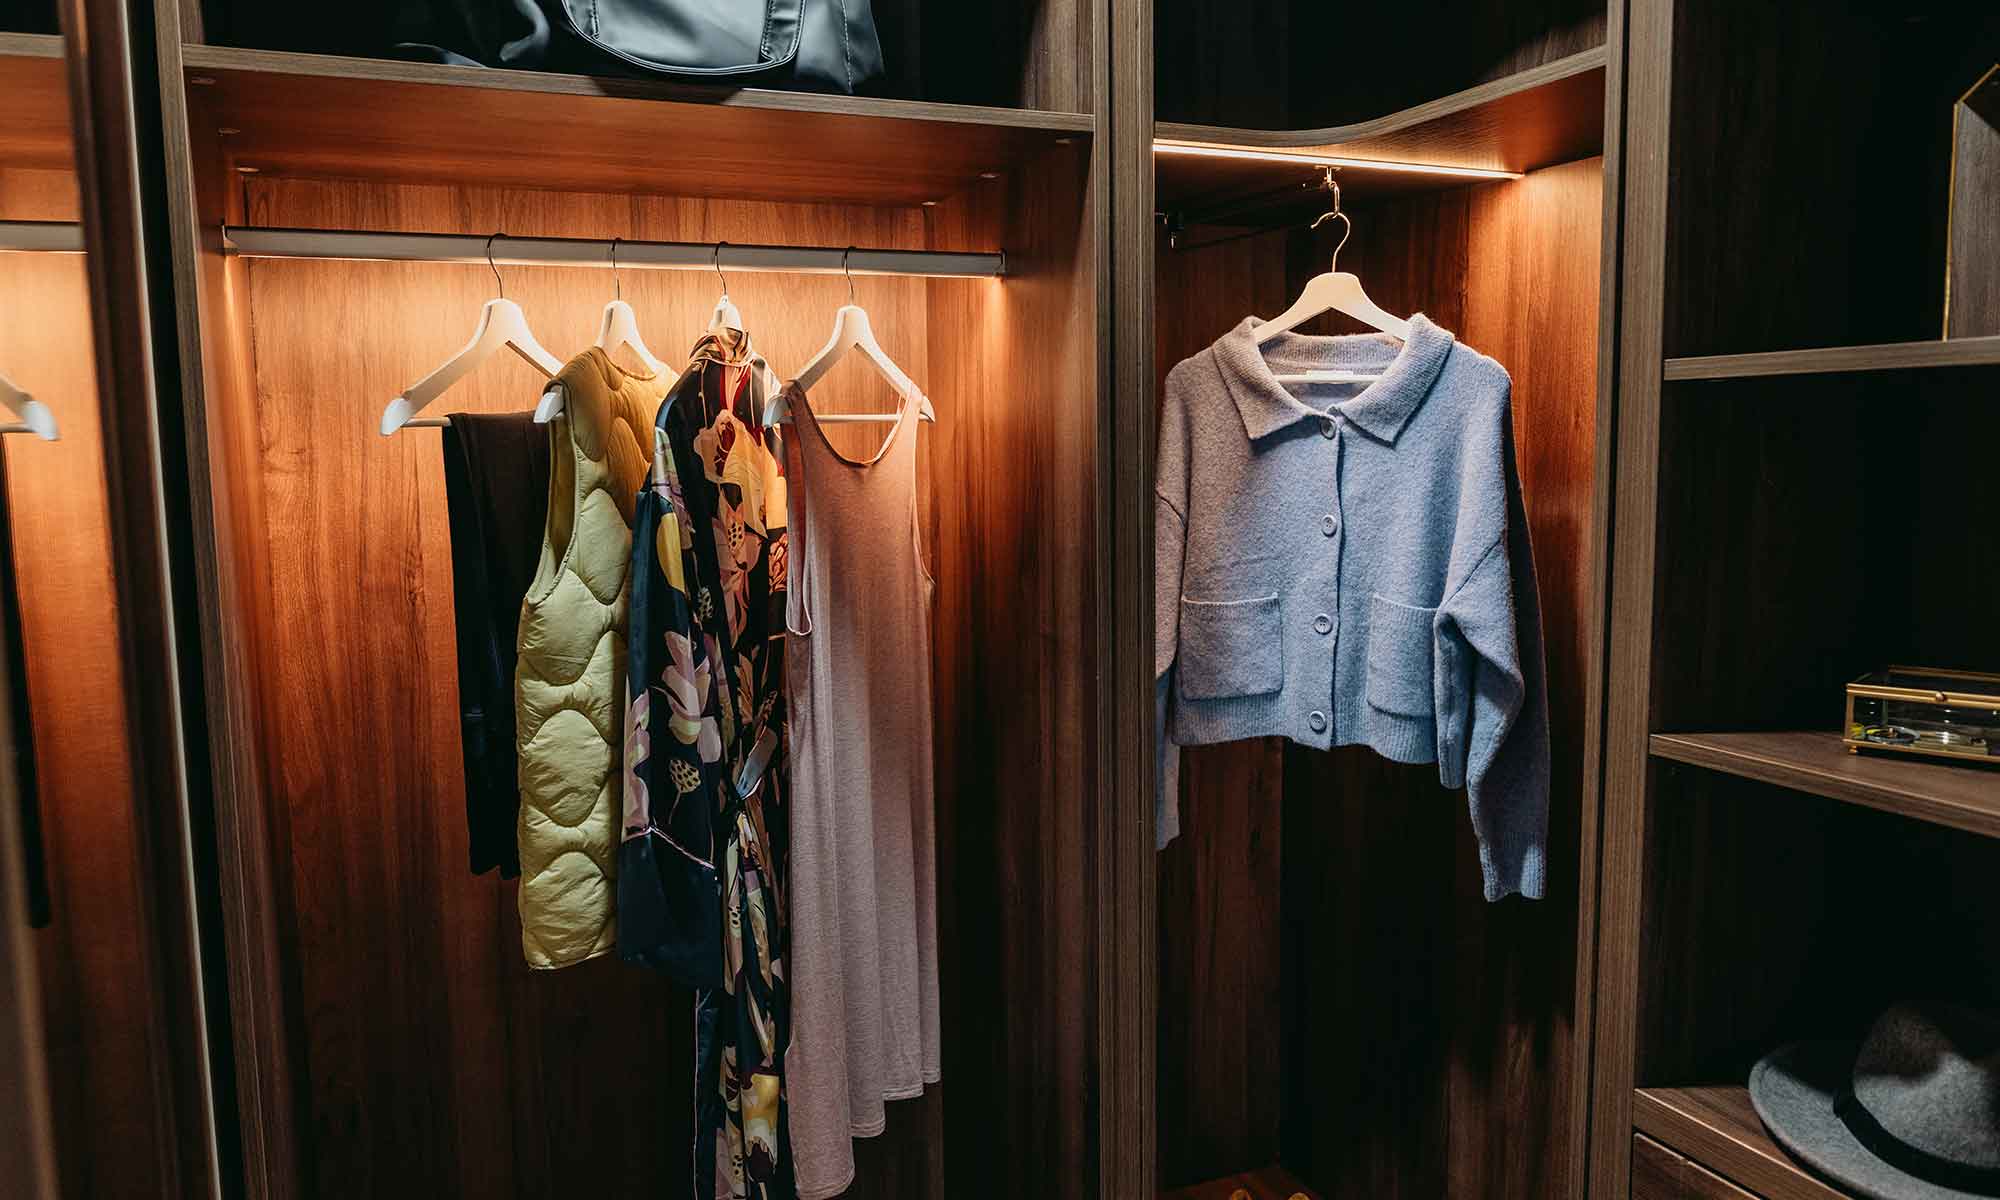 Clothes hanging in a wardrobe